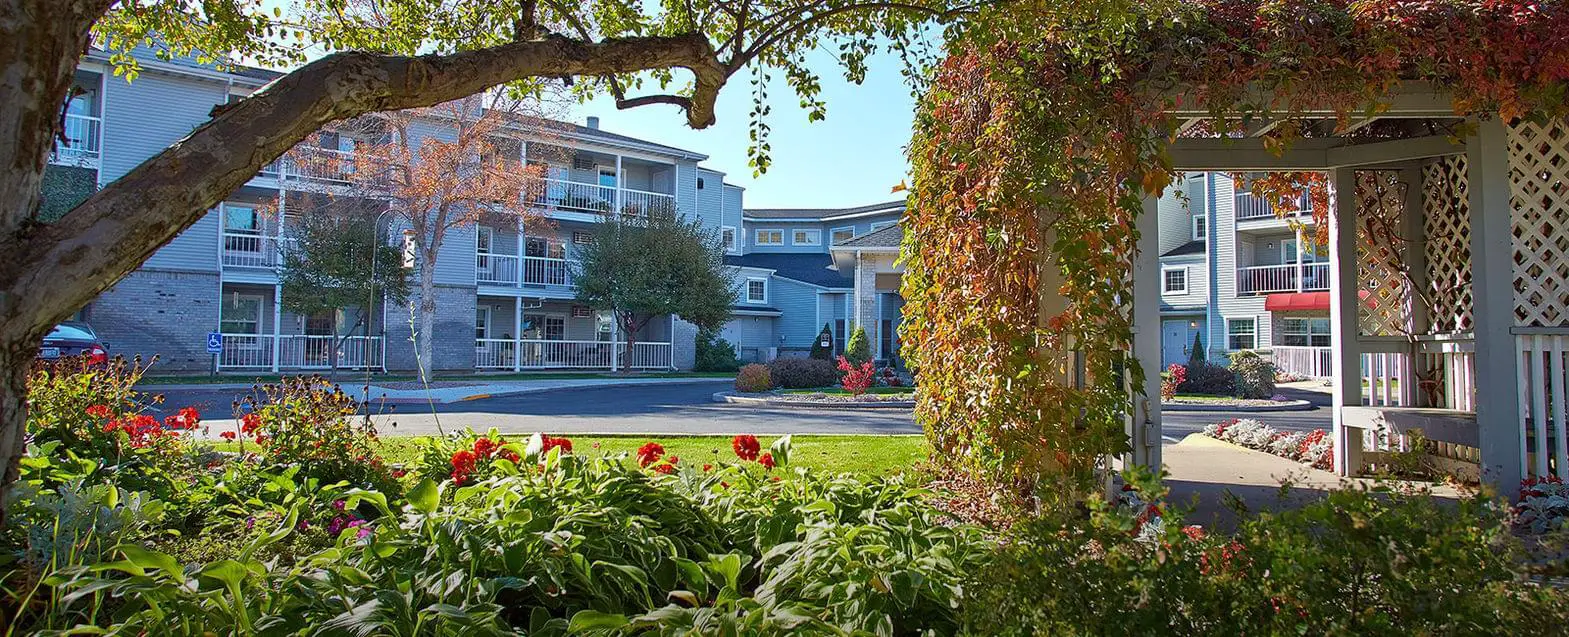 Thumbnail of The Village, Assisted Living, Nursing Home, Independent Living, CCRC, Missoula, MT 1